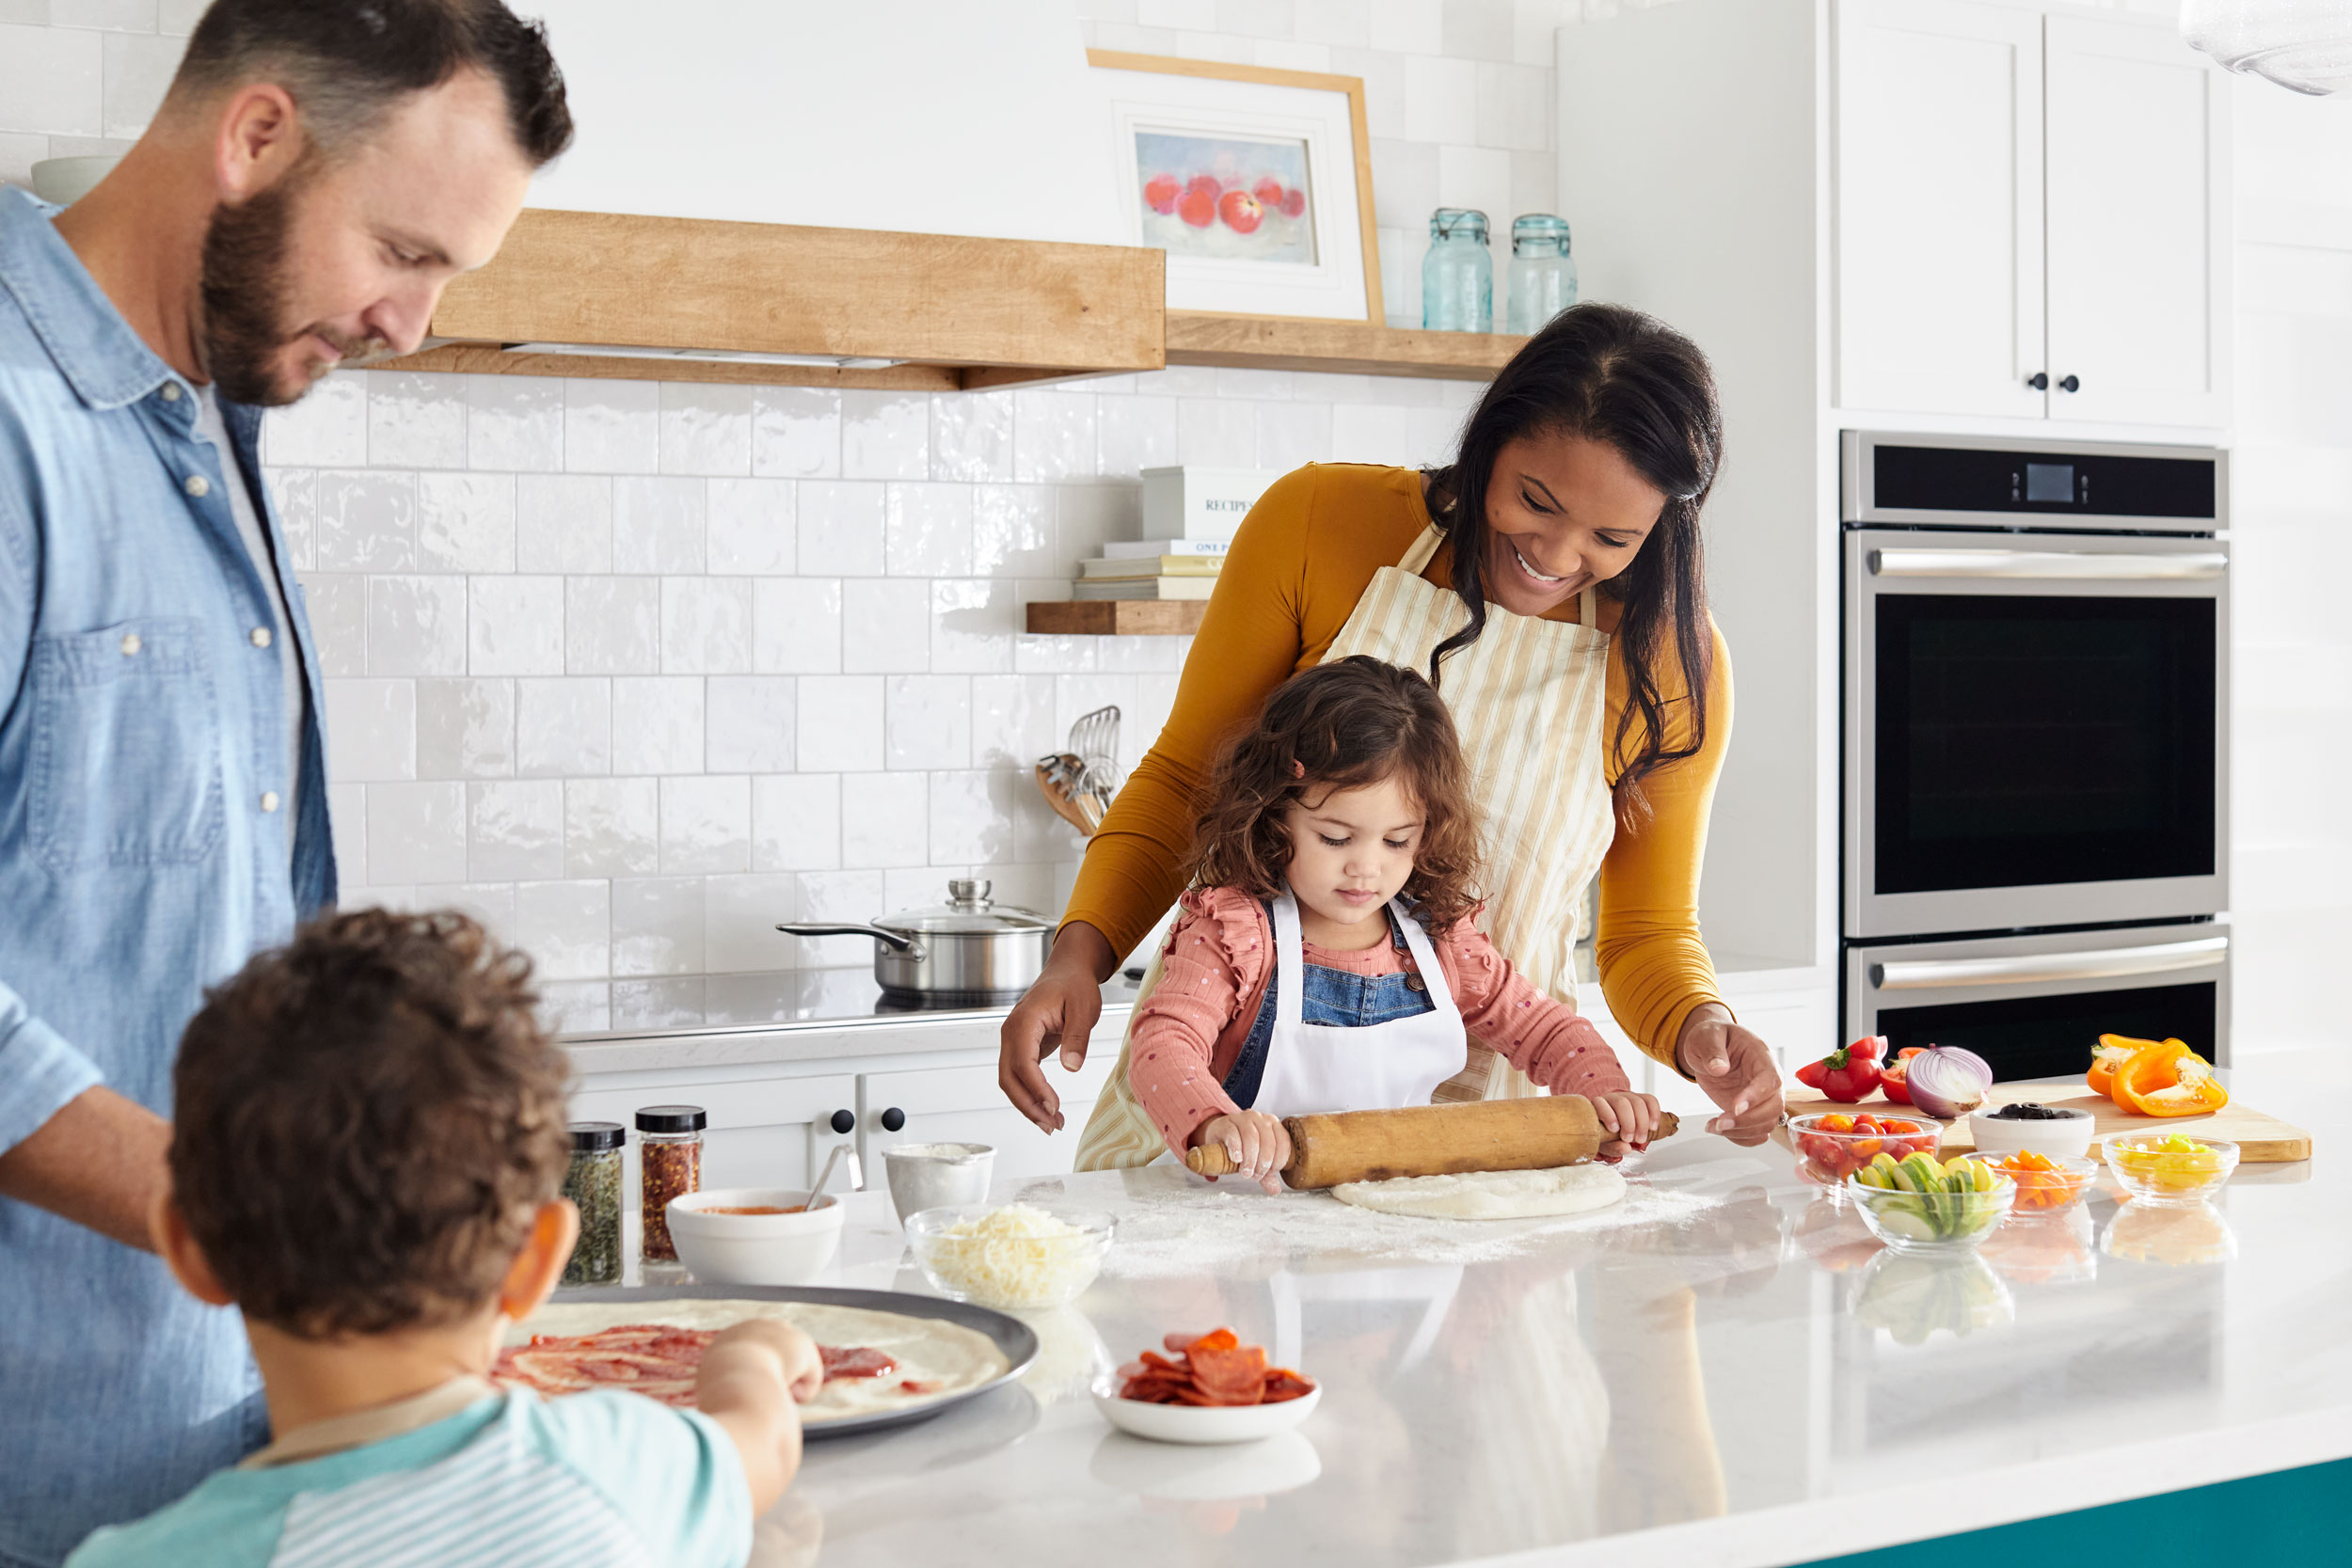 A family makes pizza together in a kitchen.